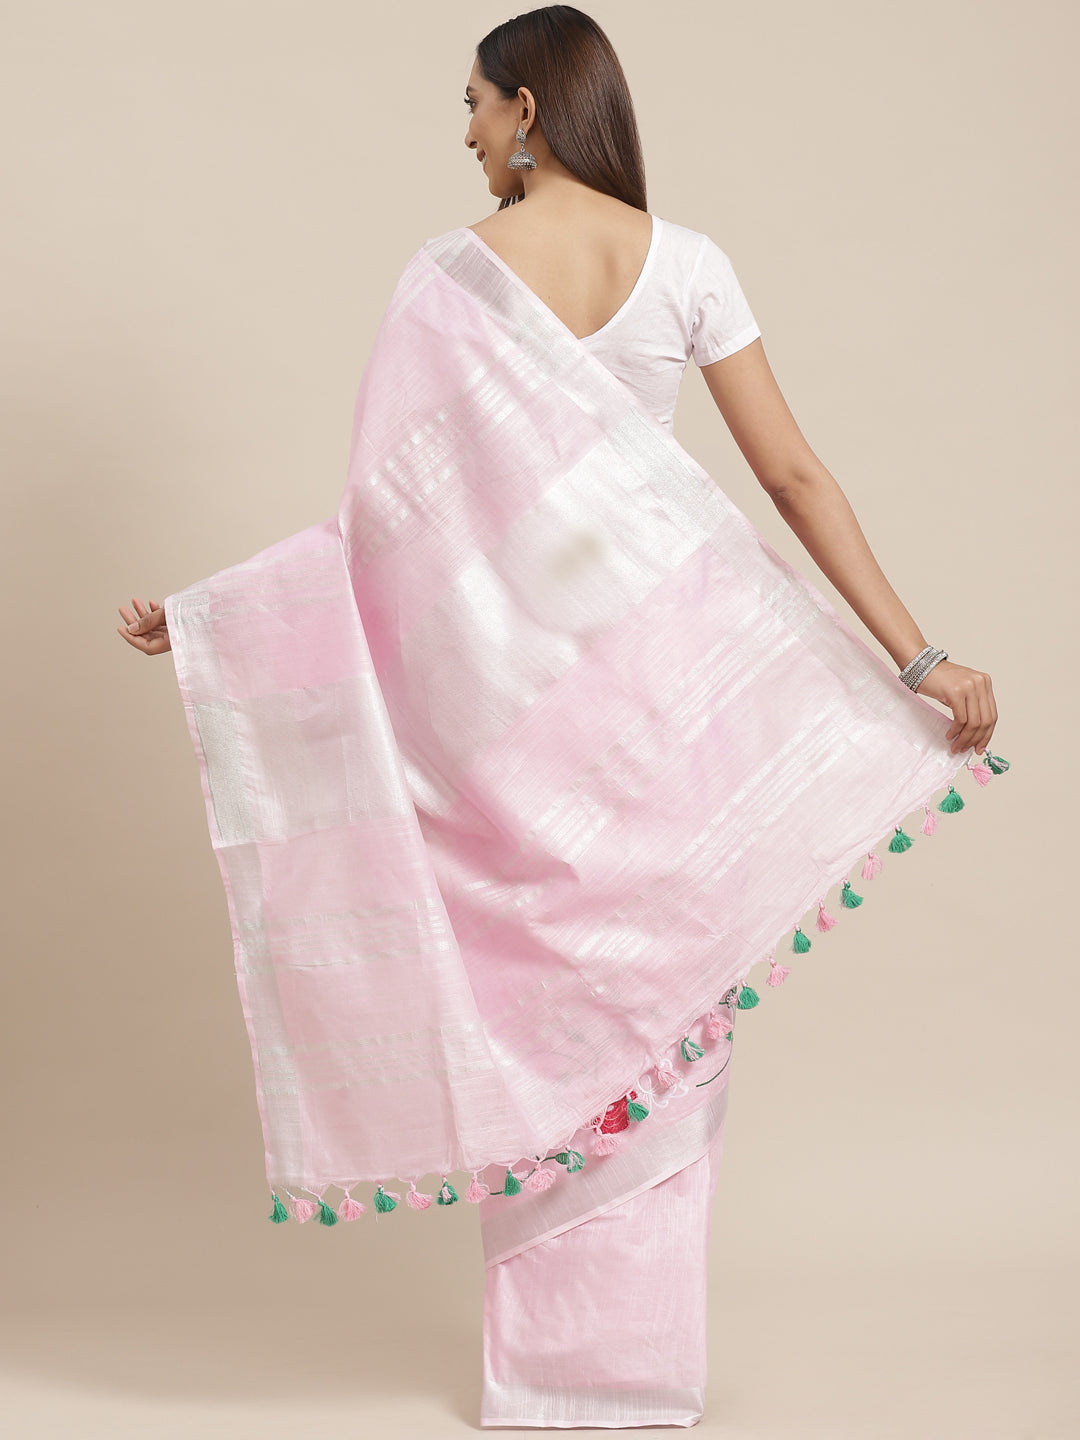 Pink and Green, Kalakari India Linen Handwoven Saree and Blouse ALBGSA0085-Saree-Kalakari India-ALBGSA0085-Cotton, Geographical Indication, Hand Crafted, Heritage Prints, Linen, Natural Dyes, Red, Sarees, Shibori, Sustainable Fabrics, Woven, Yellow-[Linen,Ethnic,wear,Fashionista,Handloom,Handicraft,Indigo,blockprint,block,print,Cotton,Chanderi,Blue, latest,classy,party,bollywood,trendy,summer,style,traditional,formal,elegant,unique,style,hand,block,print, dabu,booti,gift,present,glamorous,afford